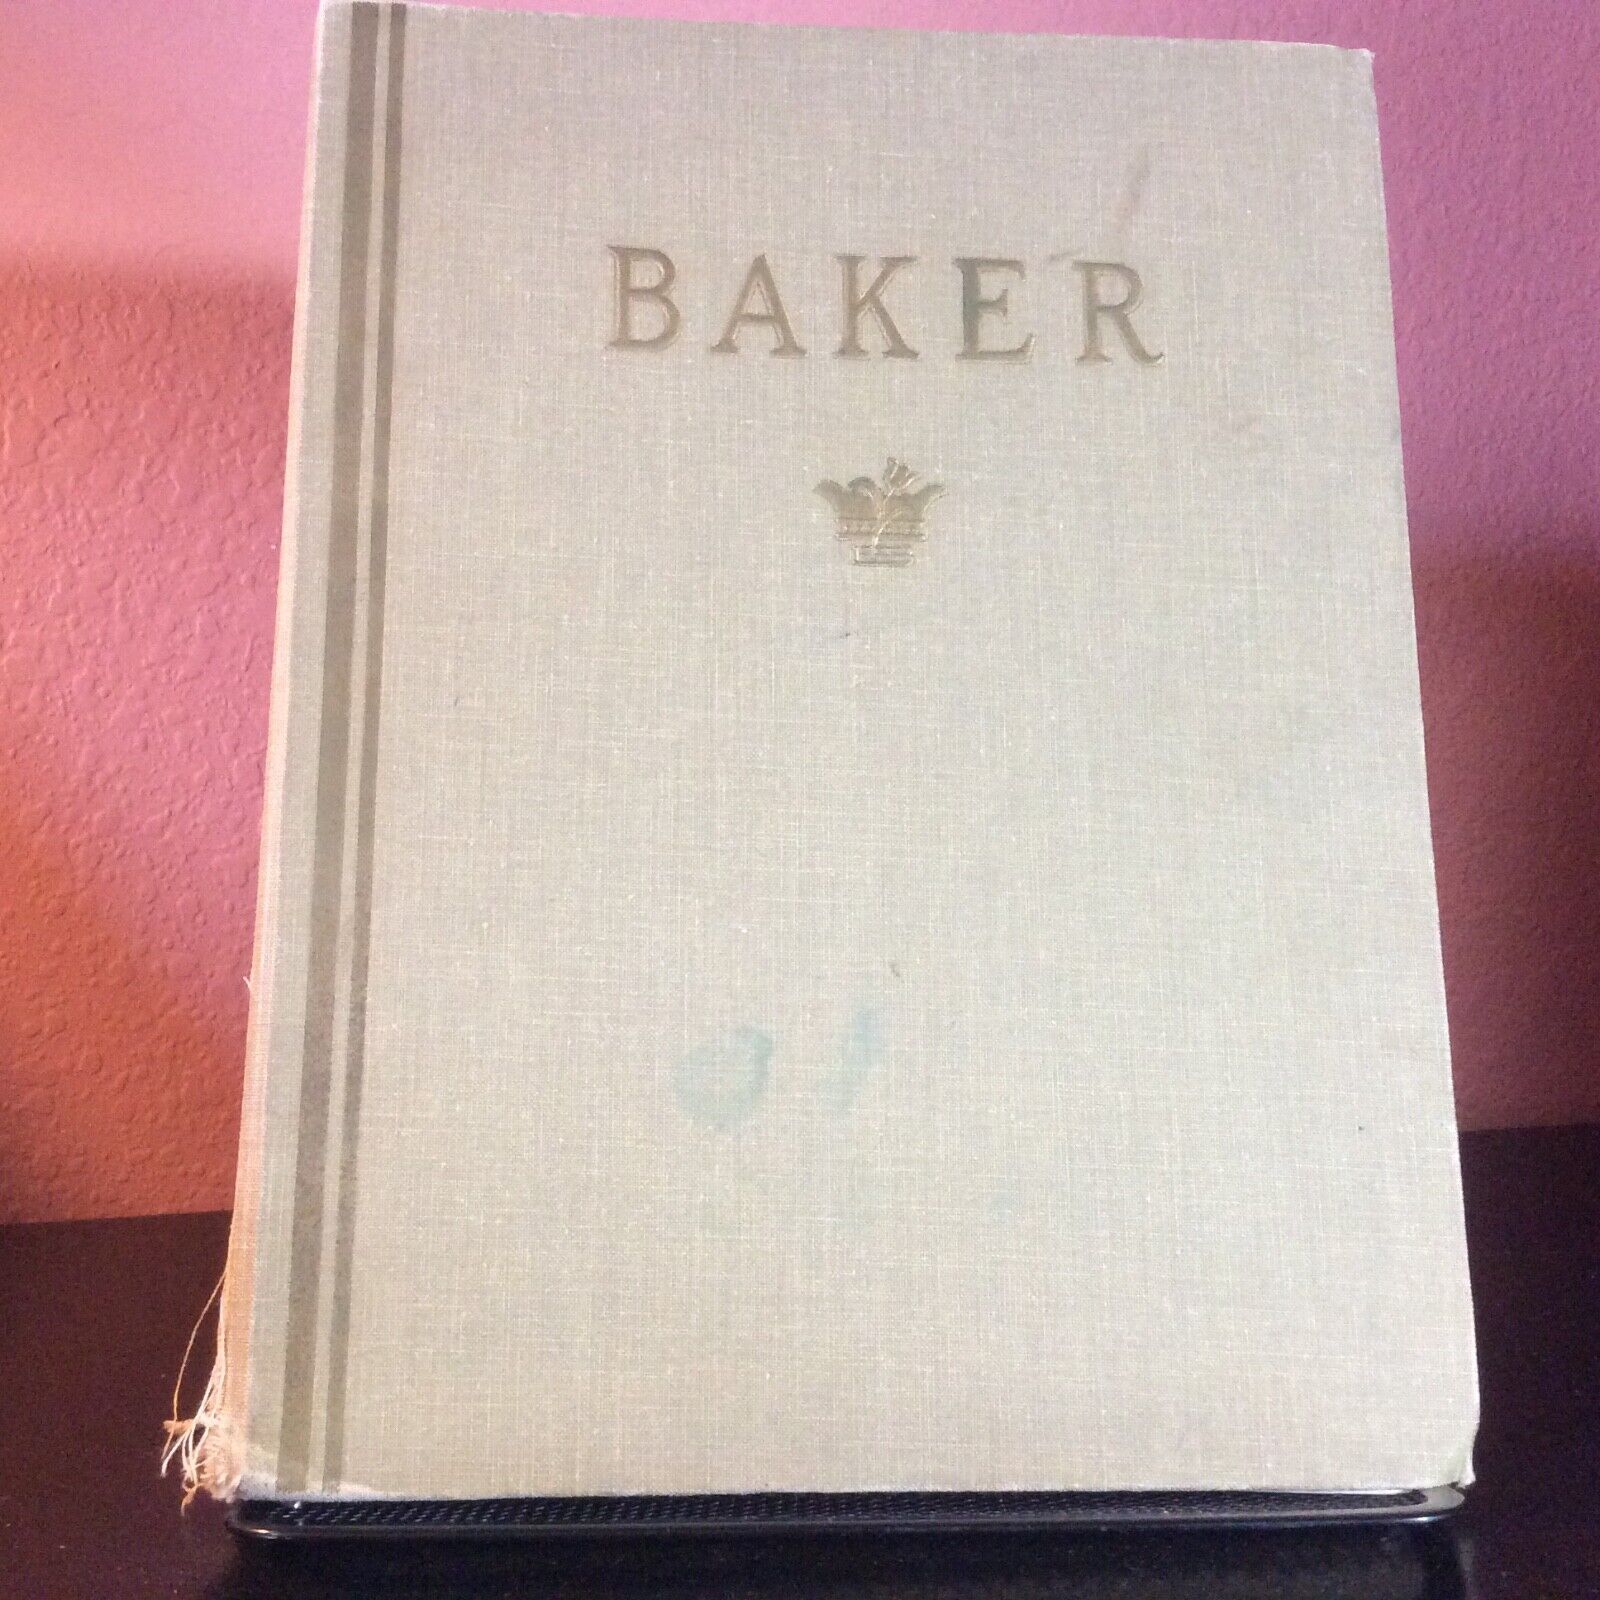 *Bound Vintage Baker Furniture Catalogs and Price Lists